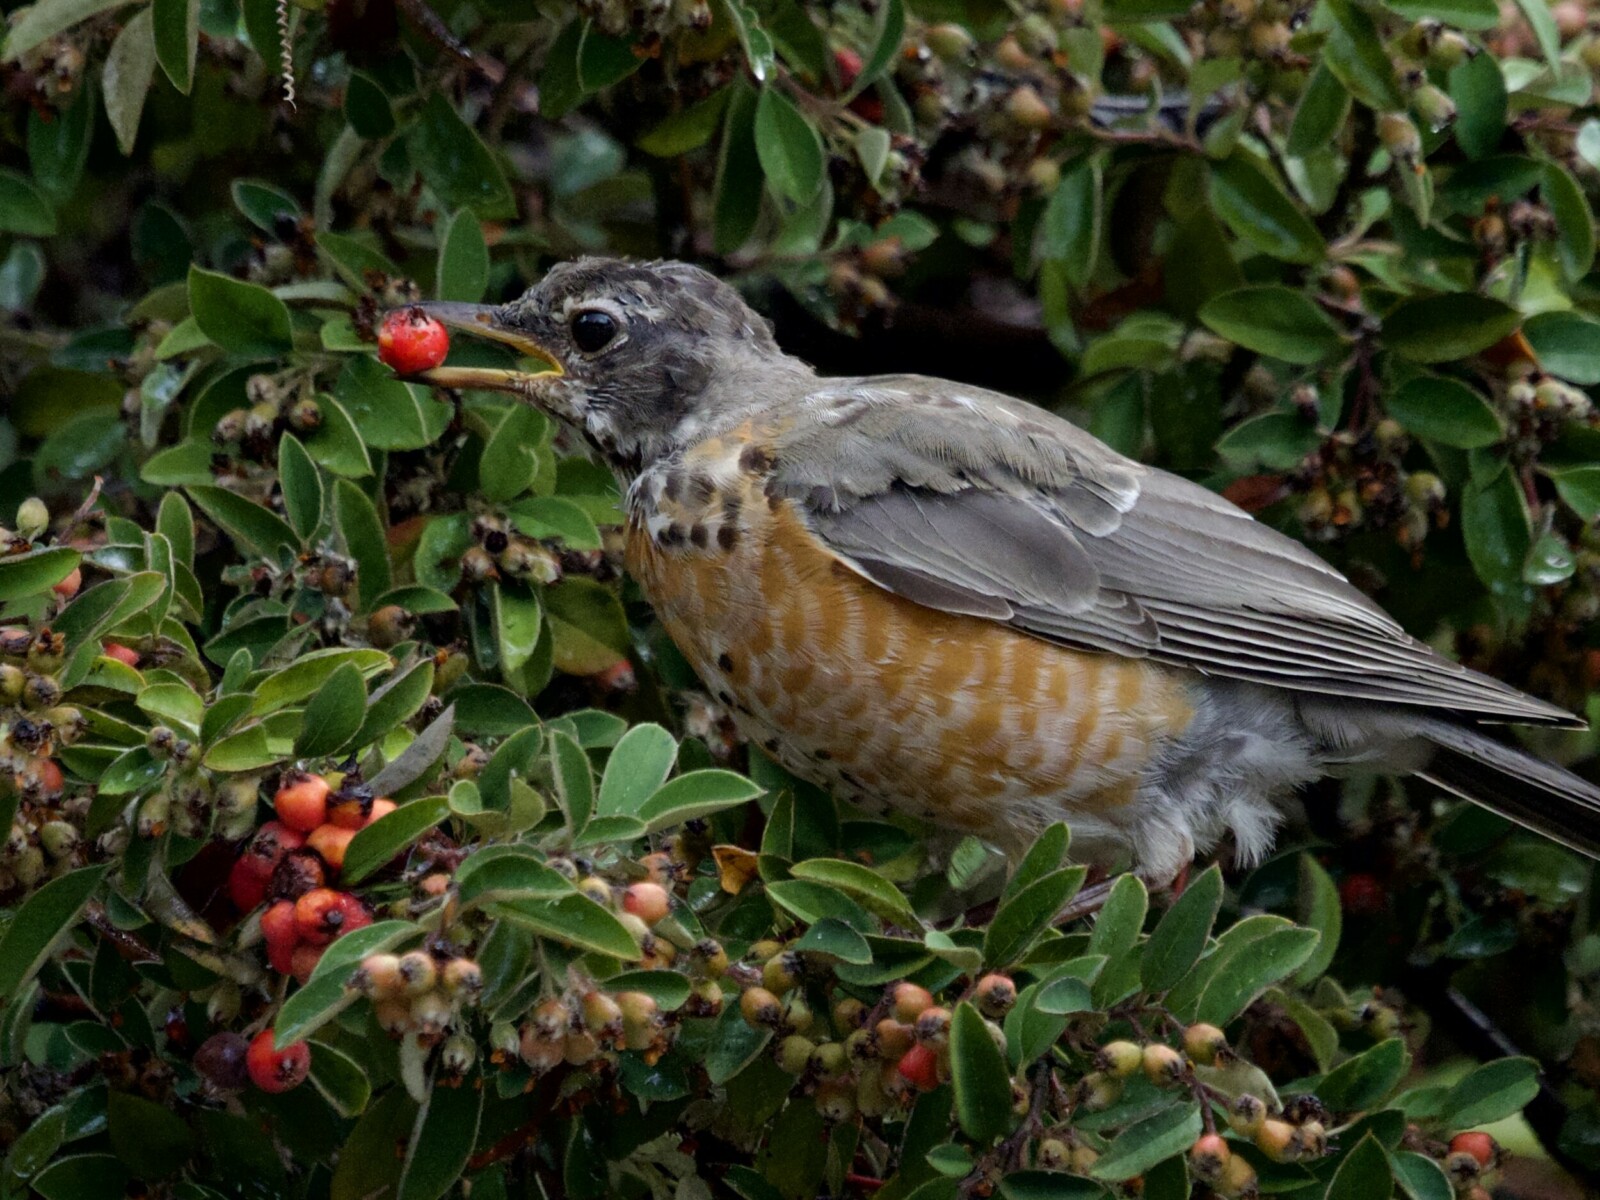 Juvenile Robin with Berry